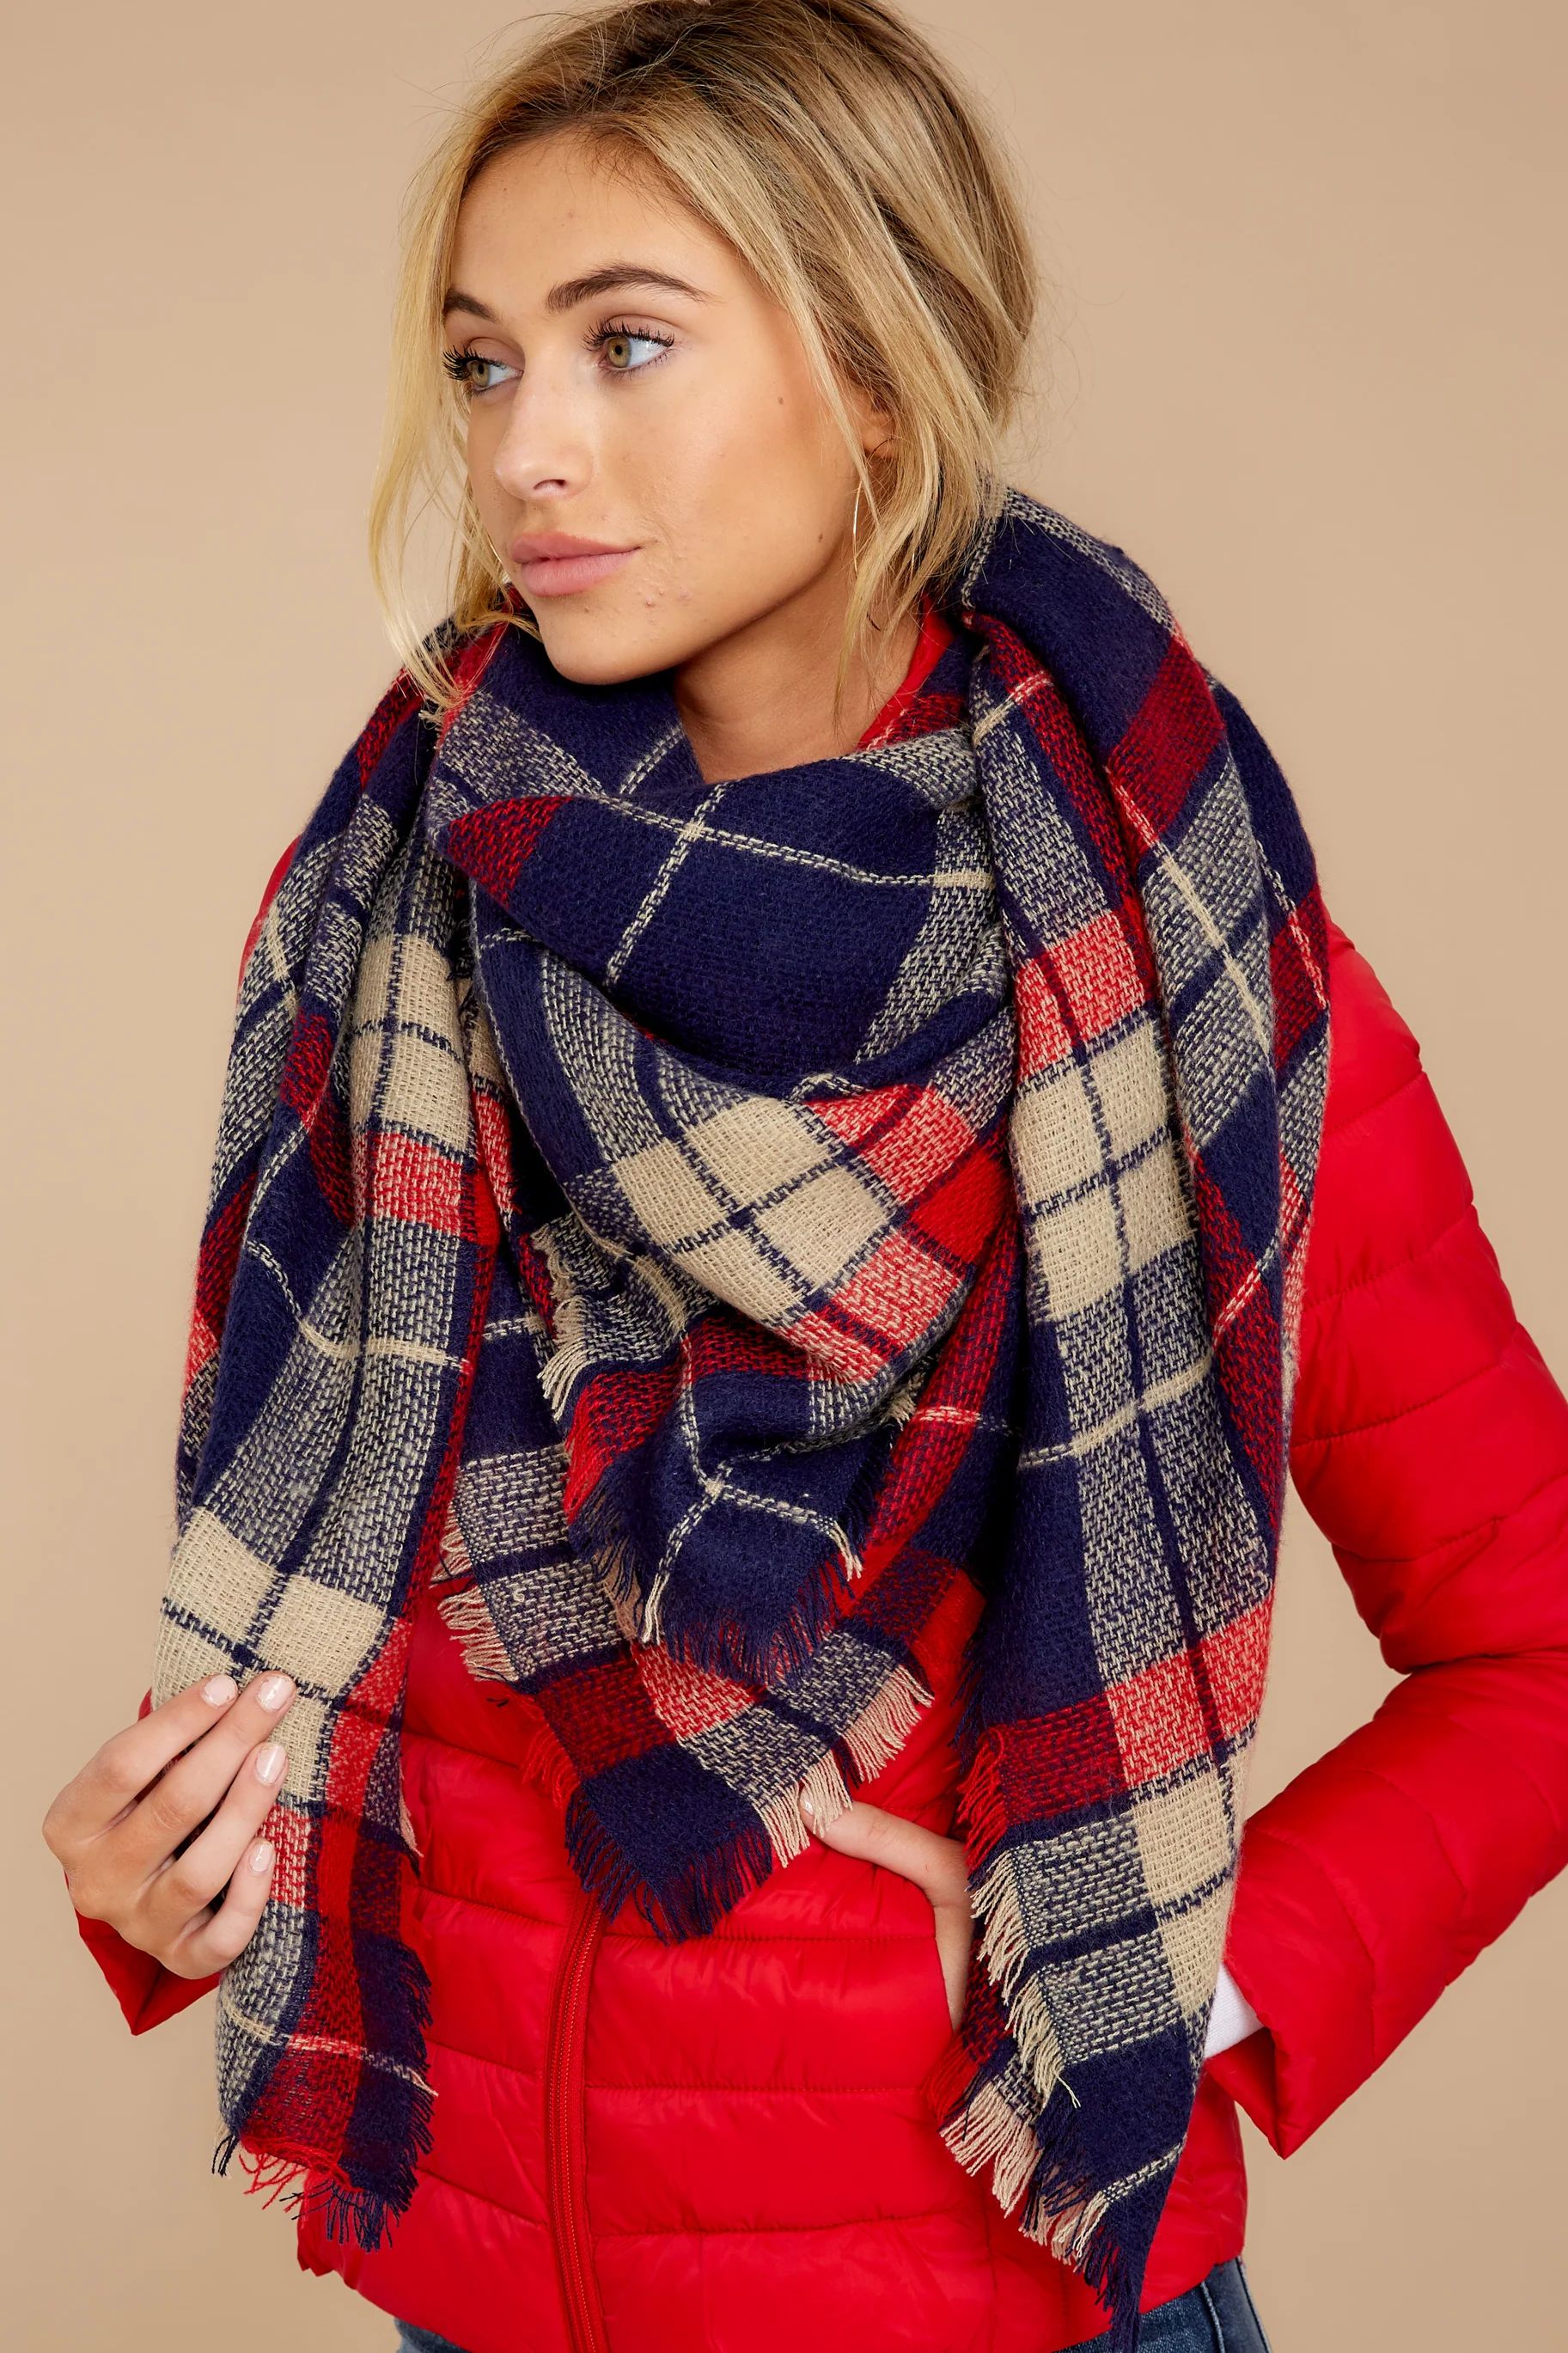 Chilled For The Day Navy And Red Plaid Scarf | Red Dress 